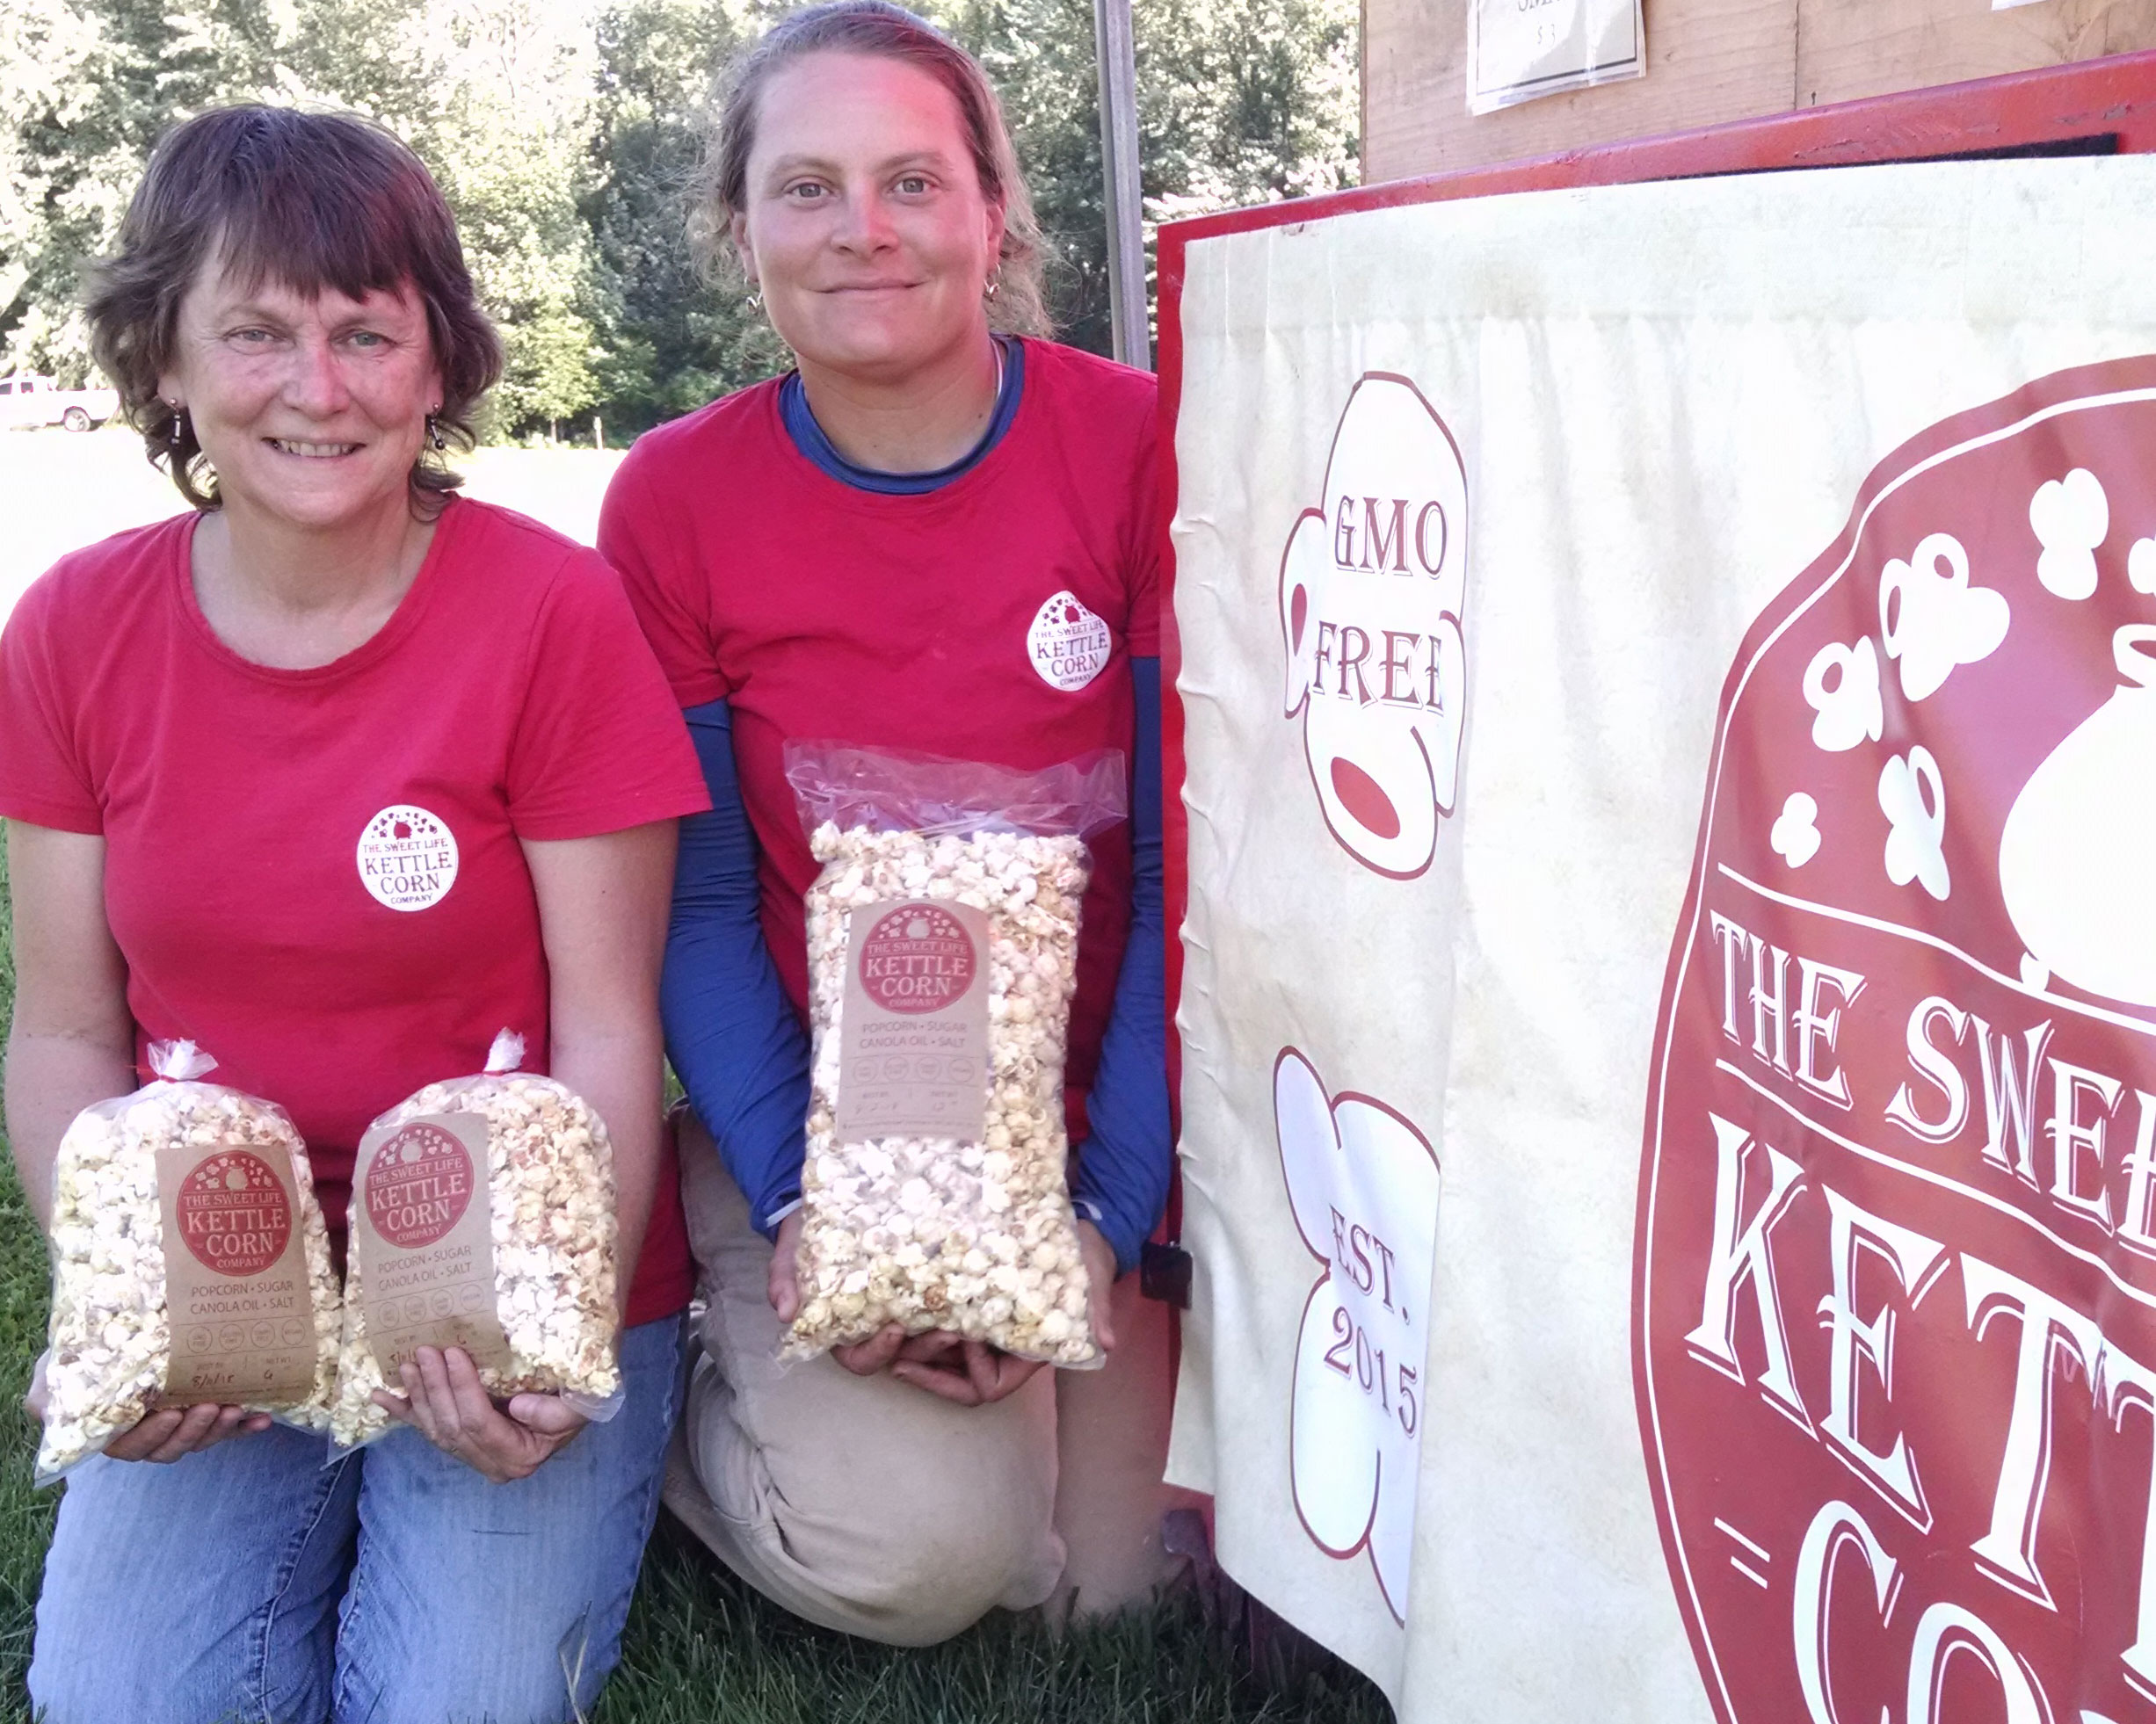 The Sweet Life Kettle Corn owners 